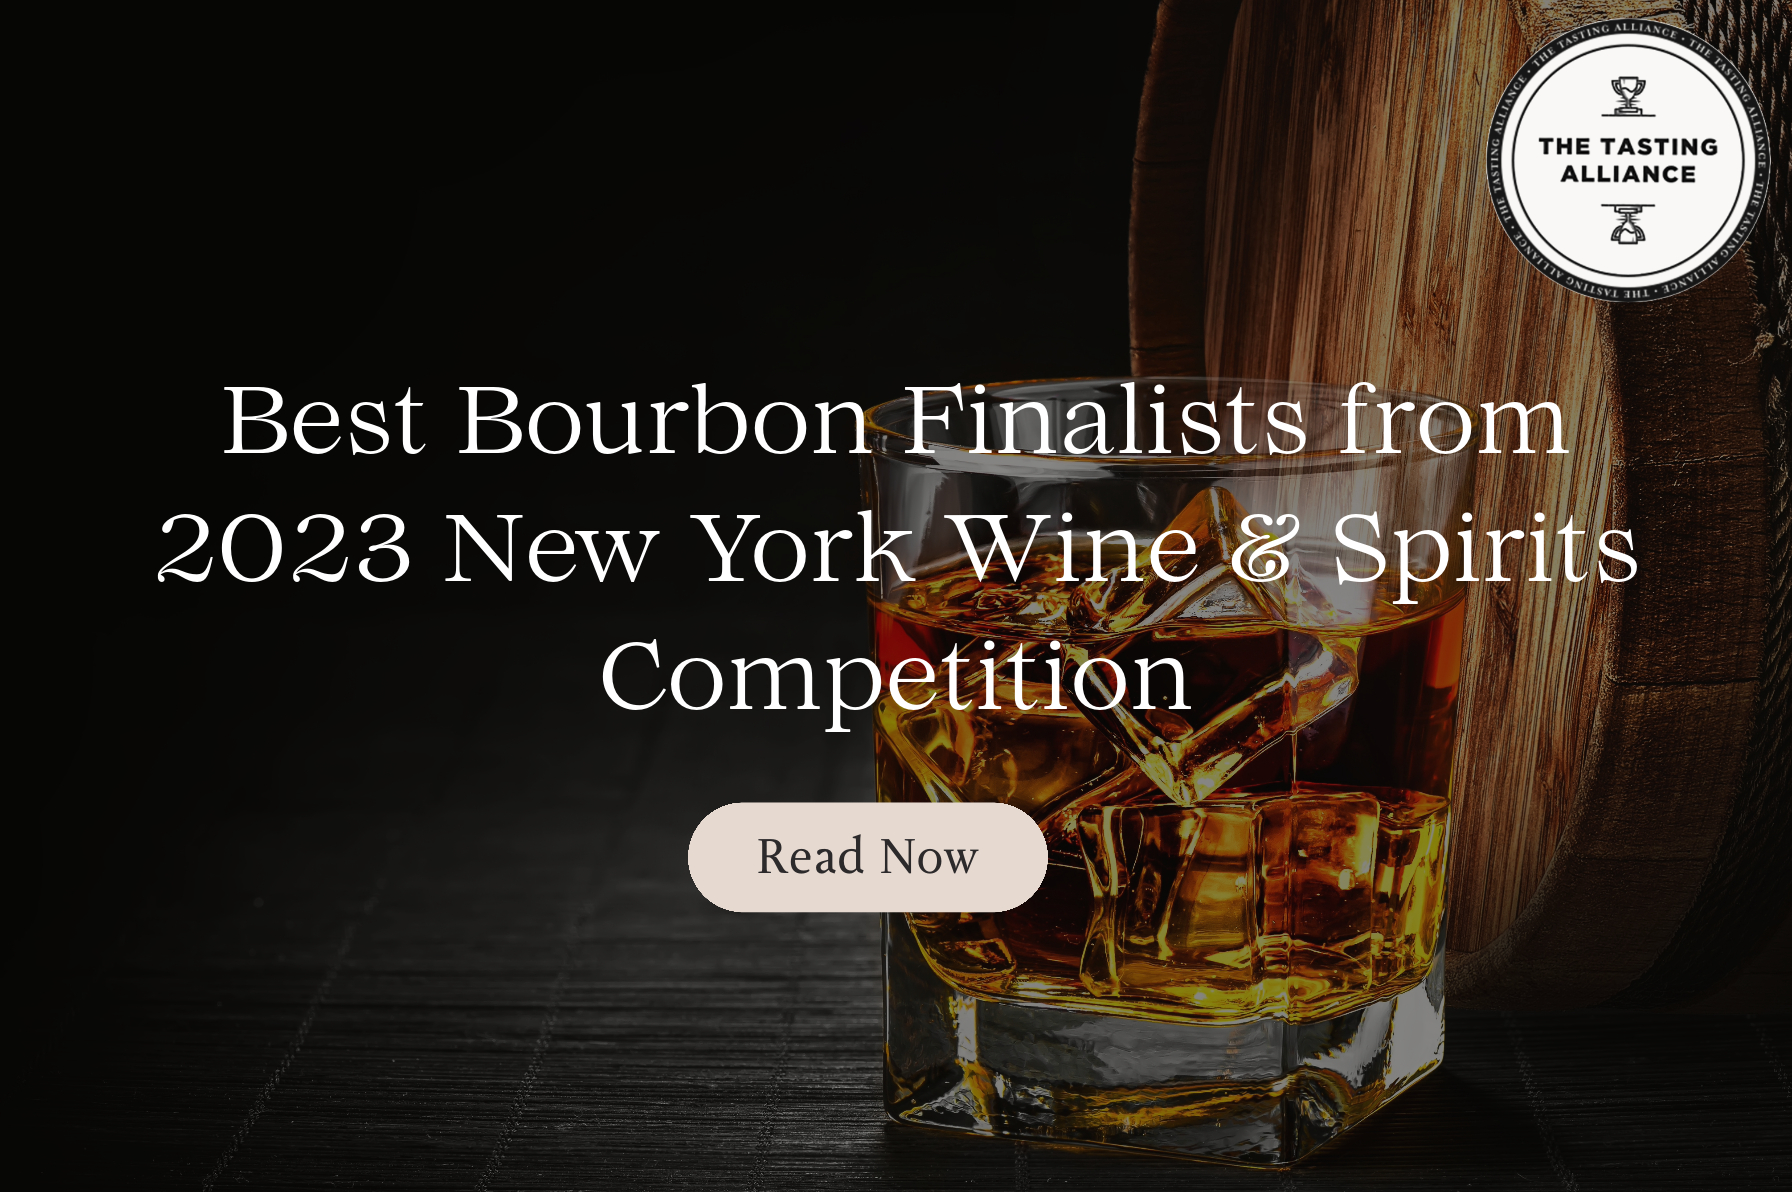 The Tasting Alliance's Best Bourbon Whiskey from 2023 New York Wine & Spirits Competition